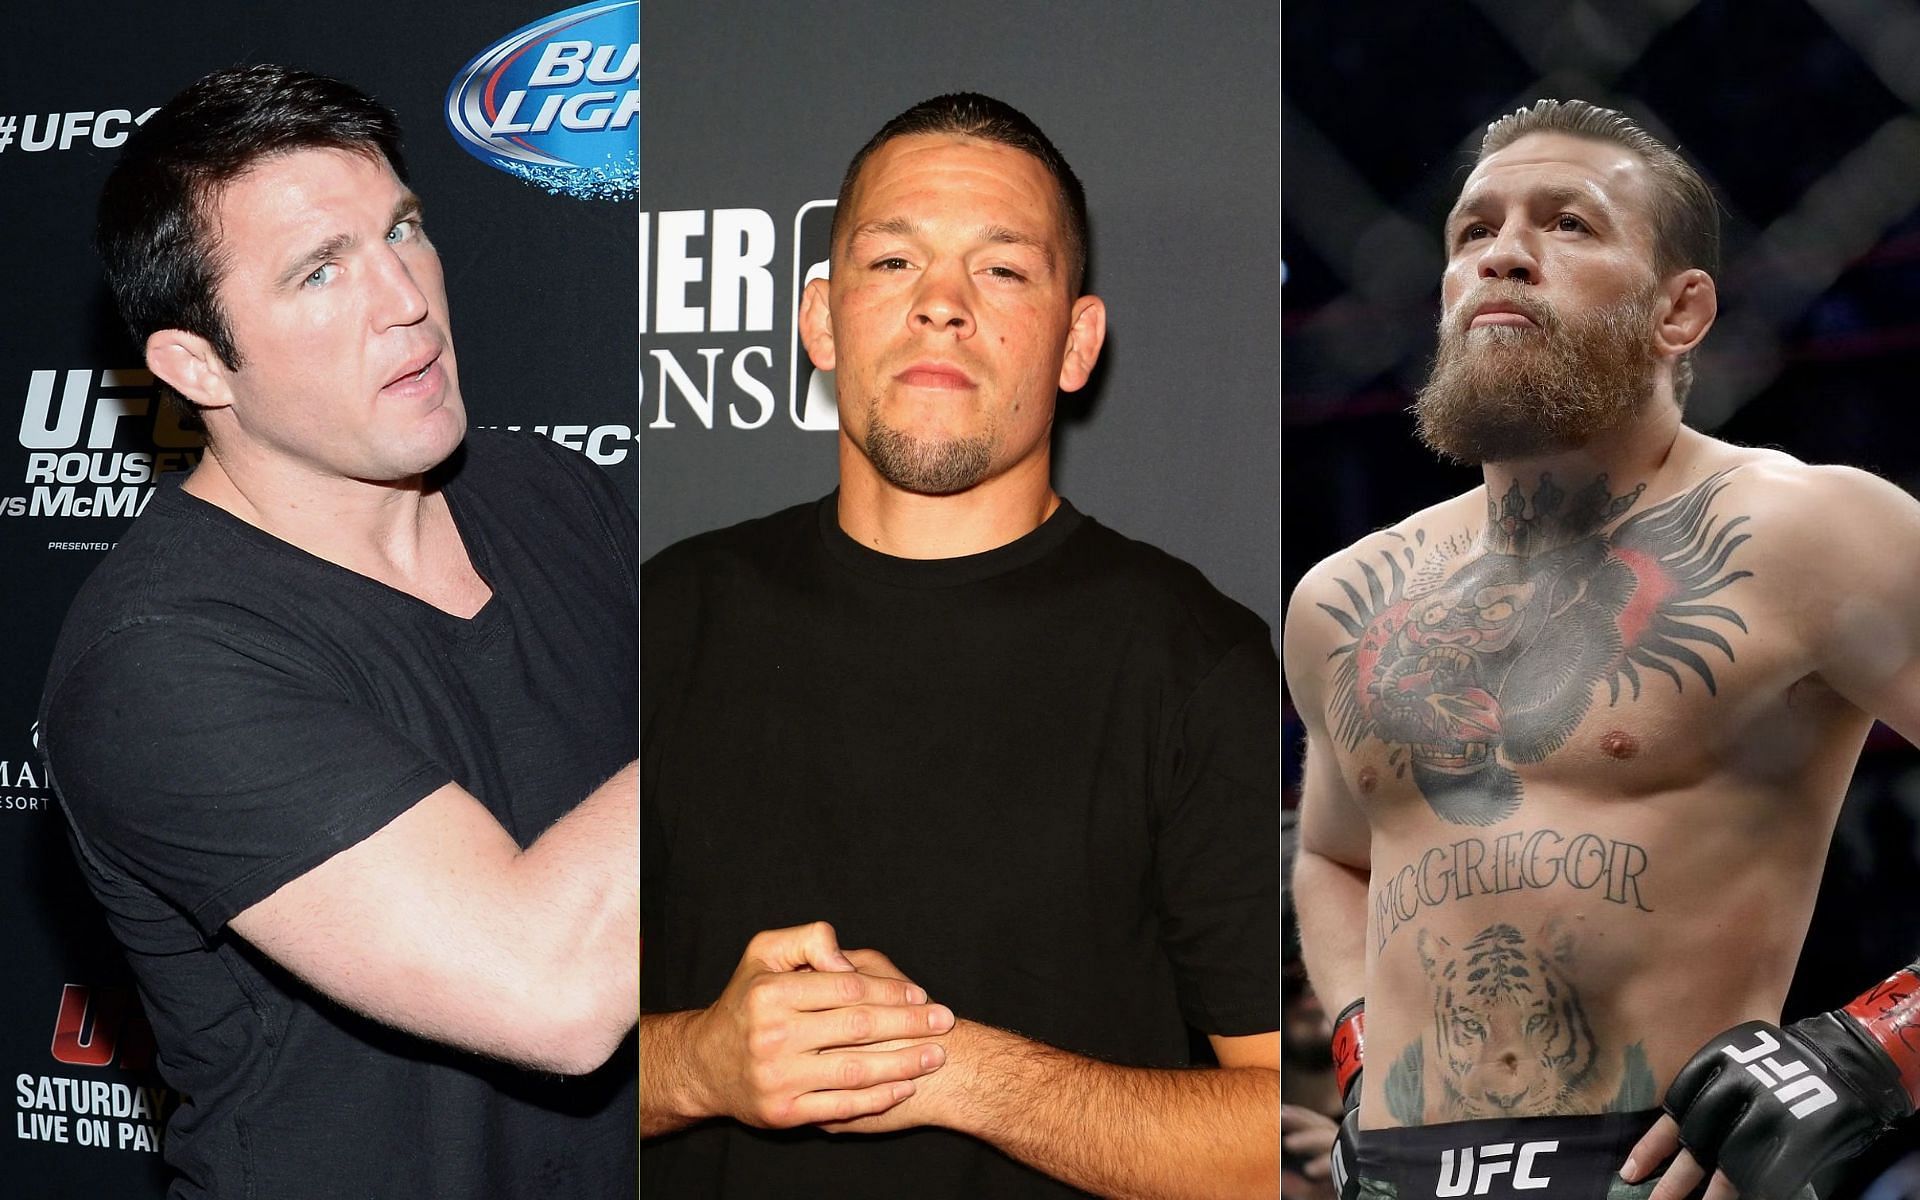 Is trash talking bad for MMA? - Quora